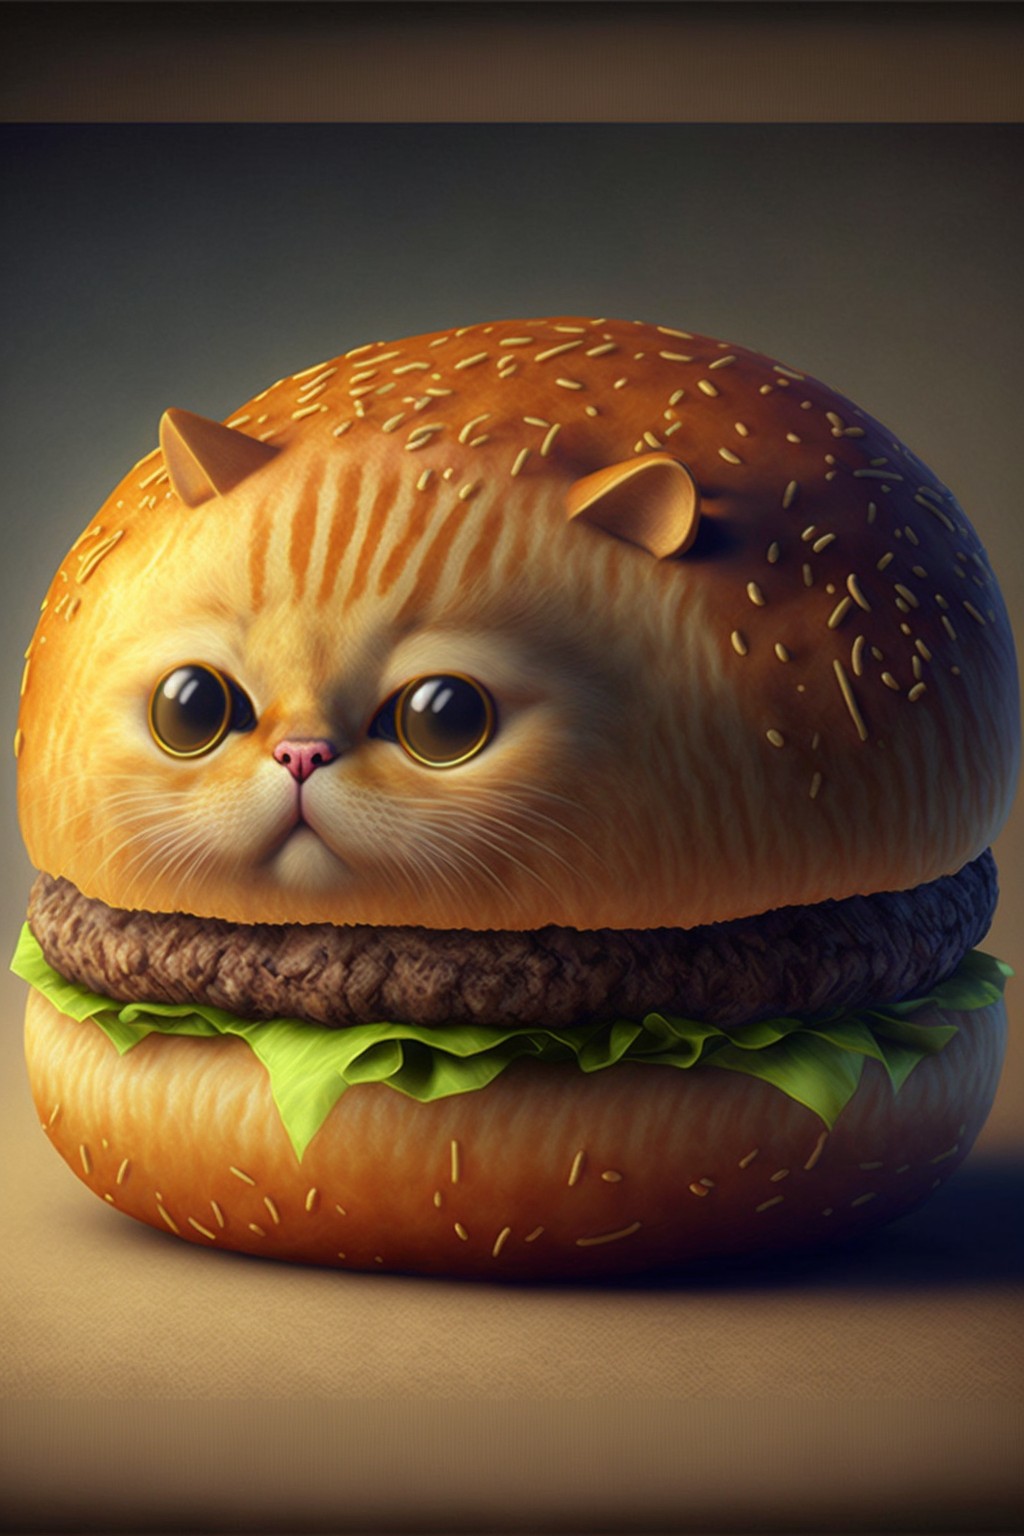 Cat Burger is here